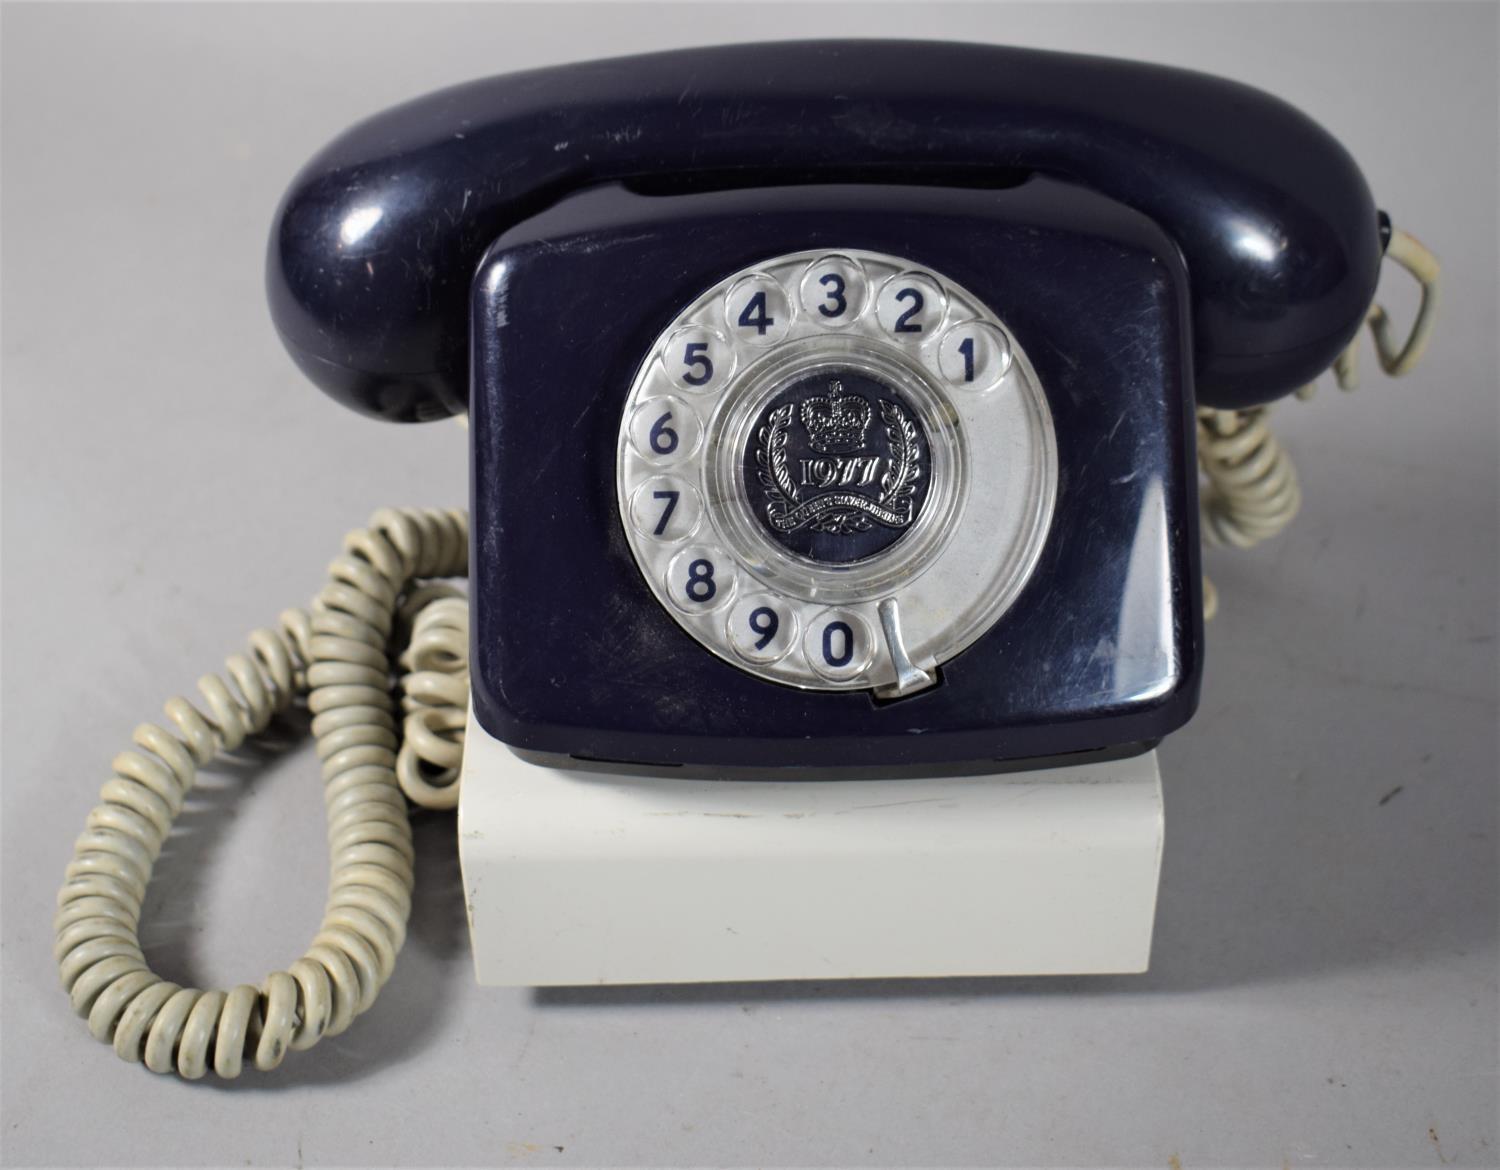 A Vintage 1977 Commemorative Telephone for the Queen's Silver Jubilee. - Image 2 of 3